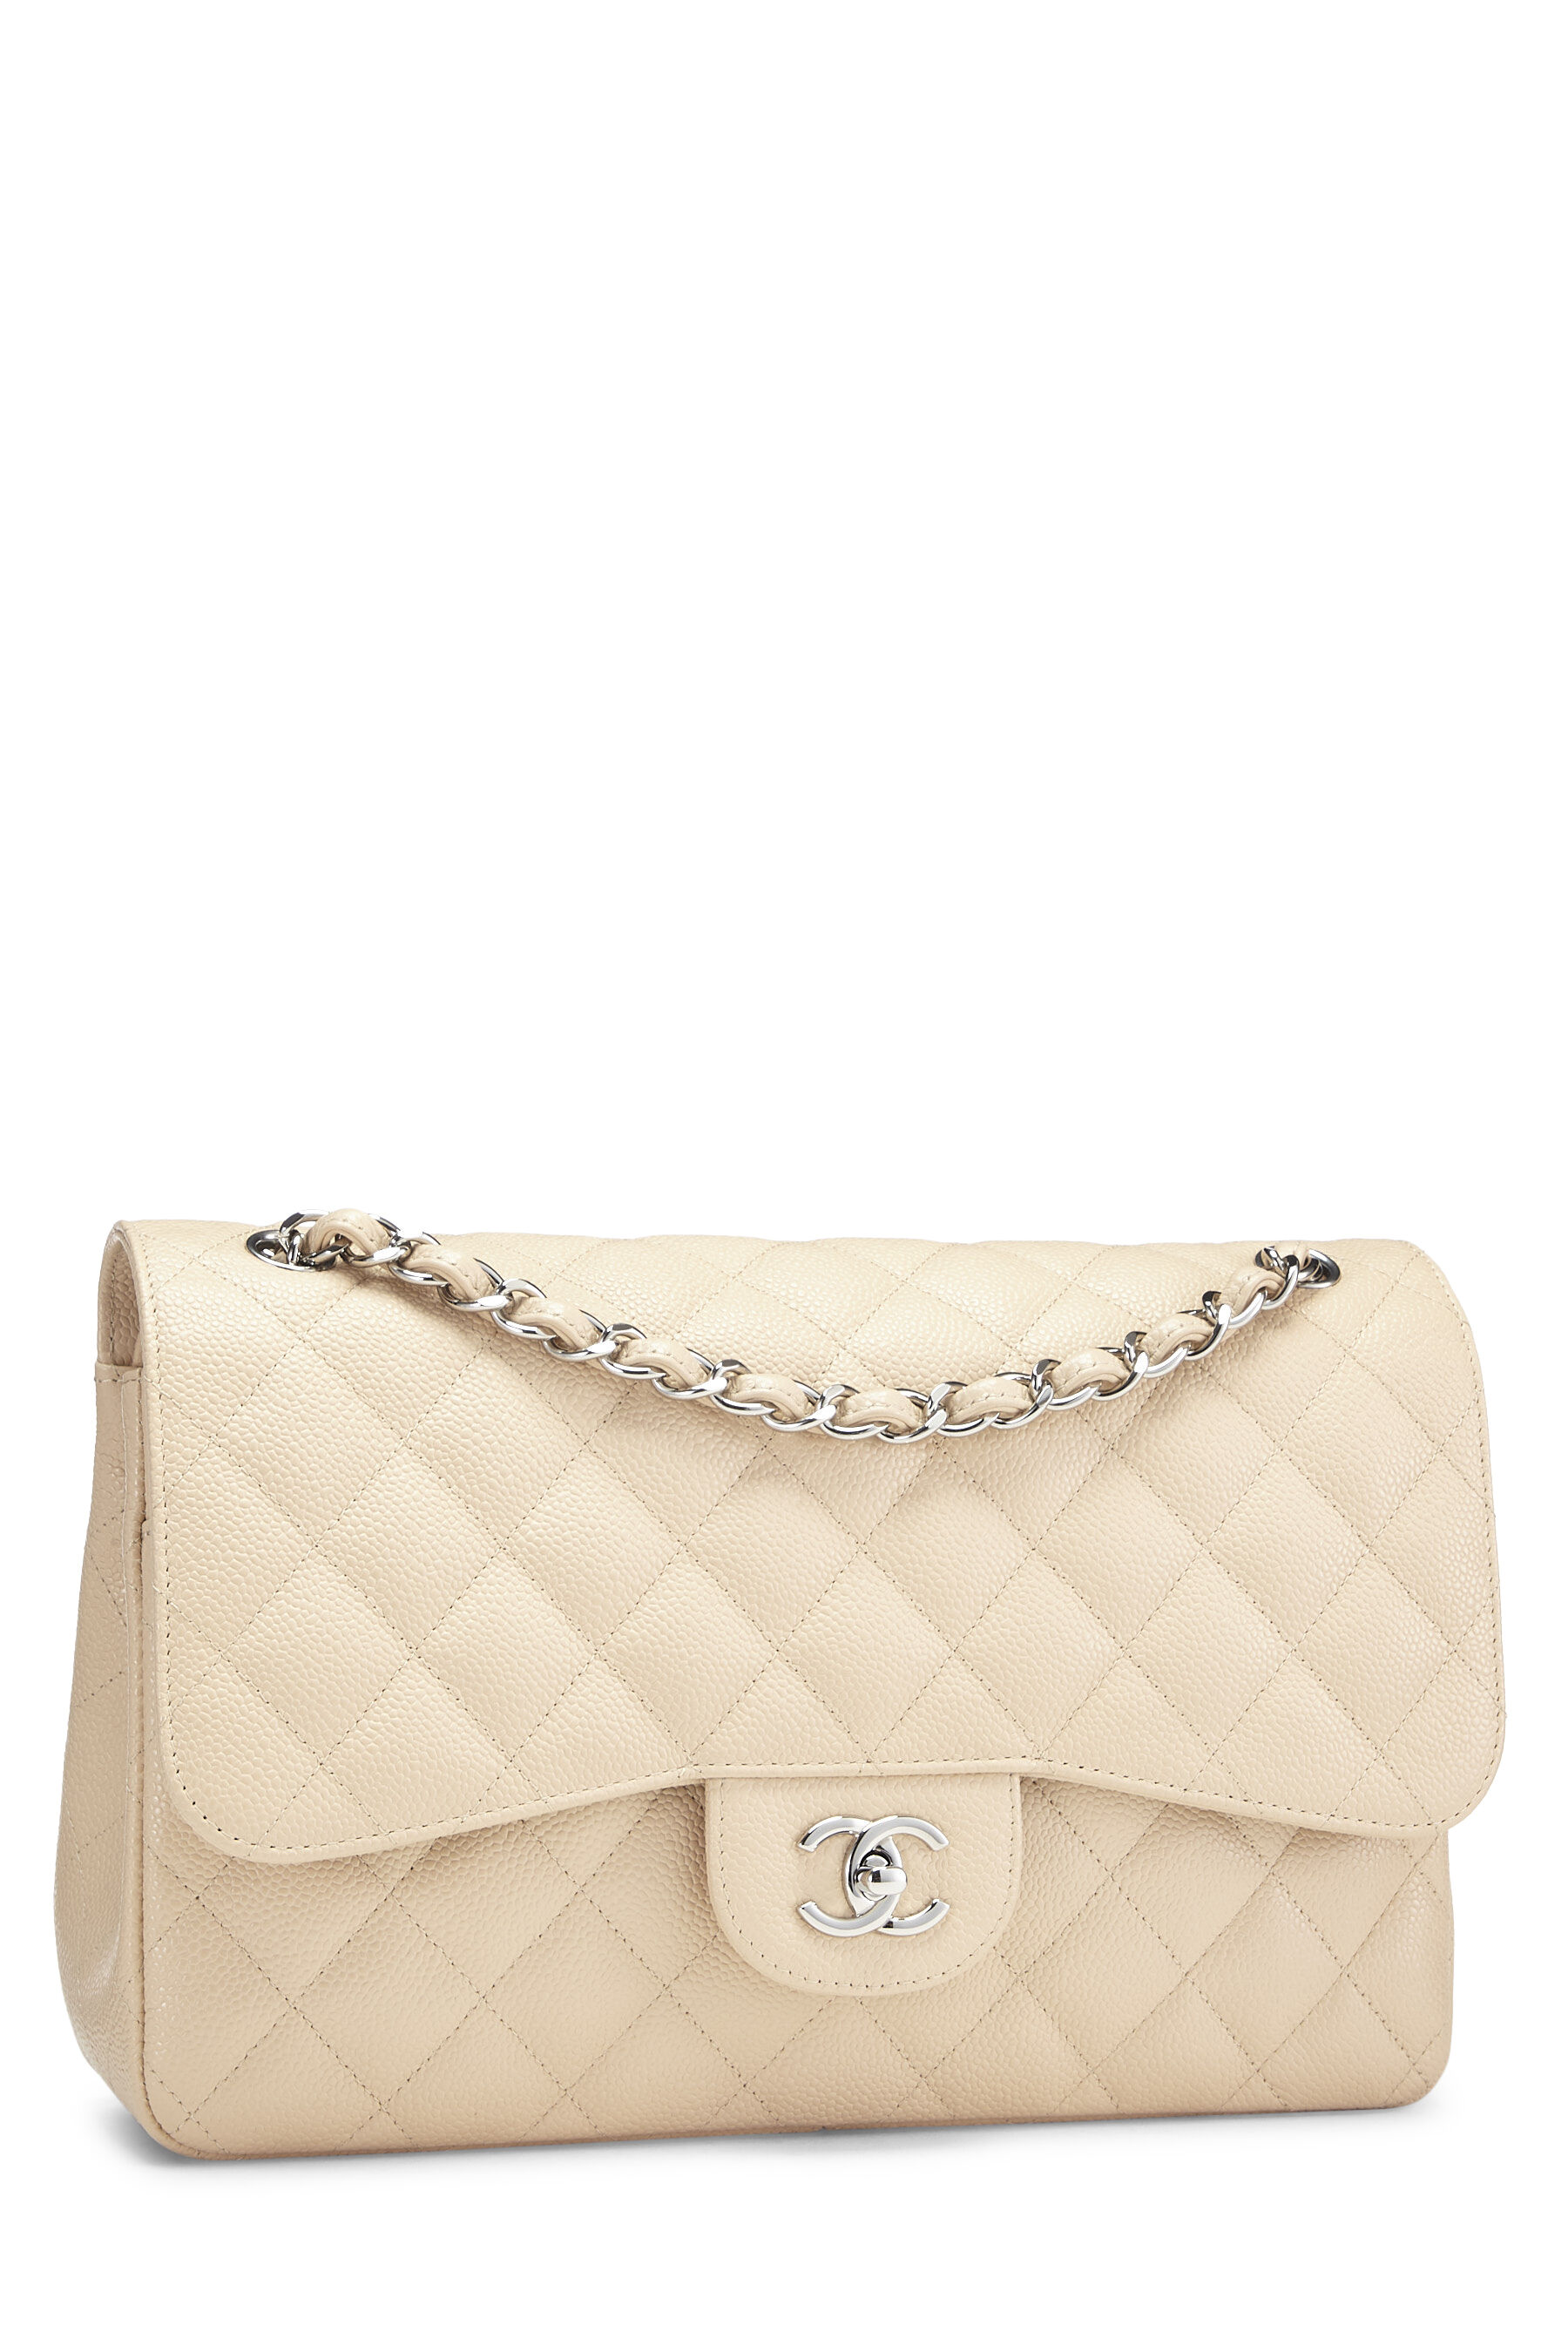 Chanel Beige Quilted Caviar New Classic Double Flap Jumbo Q6BAQP0FI4048